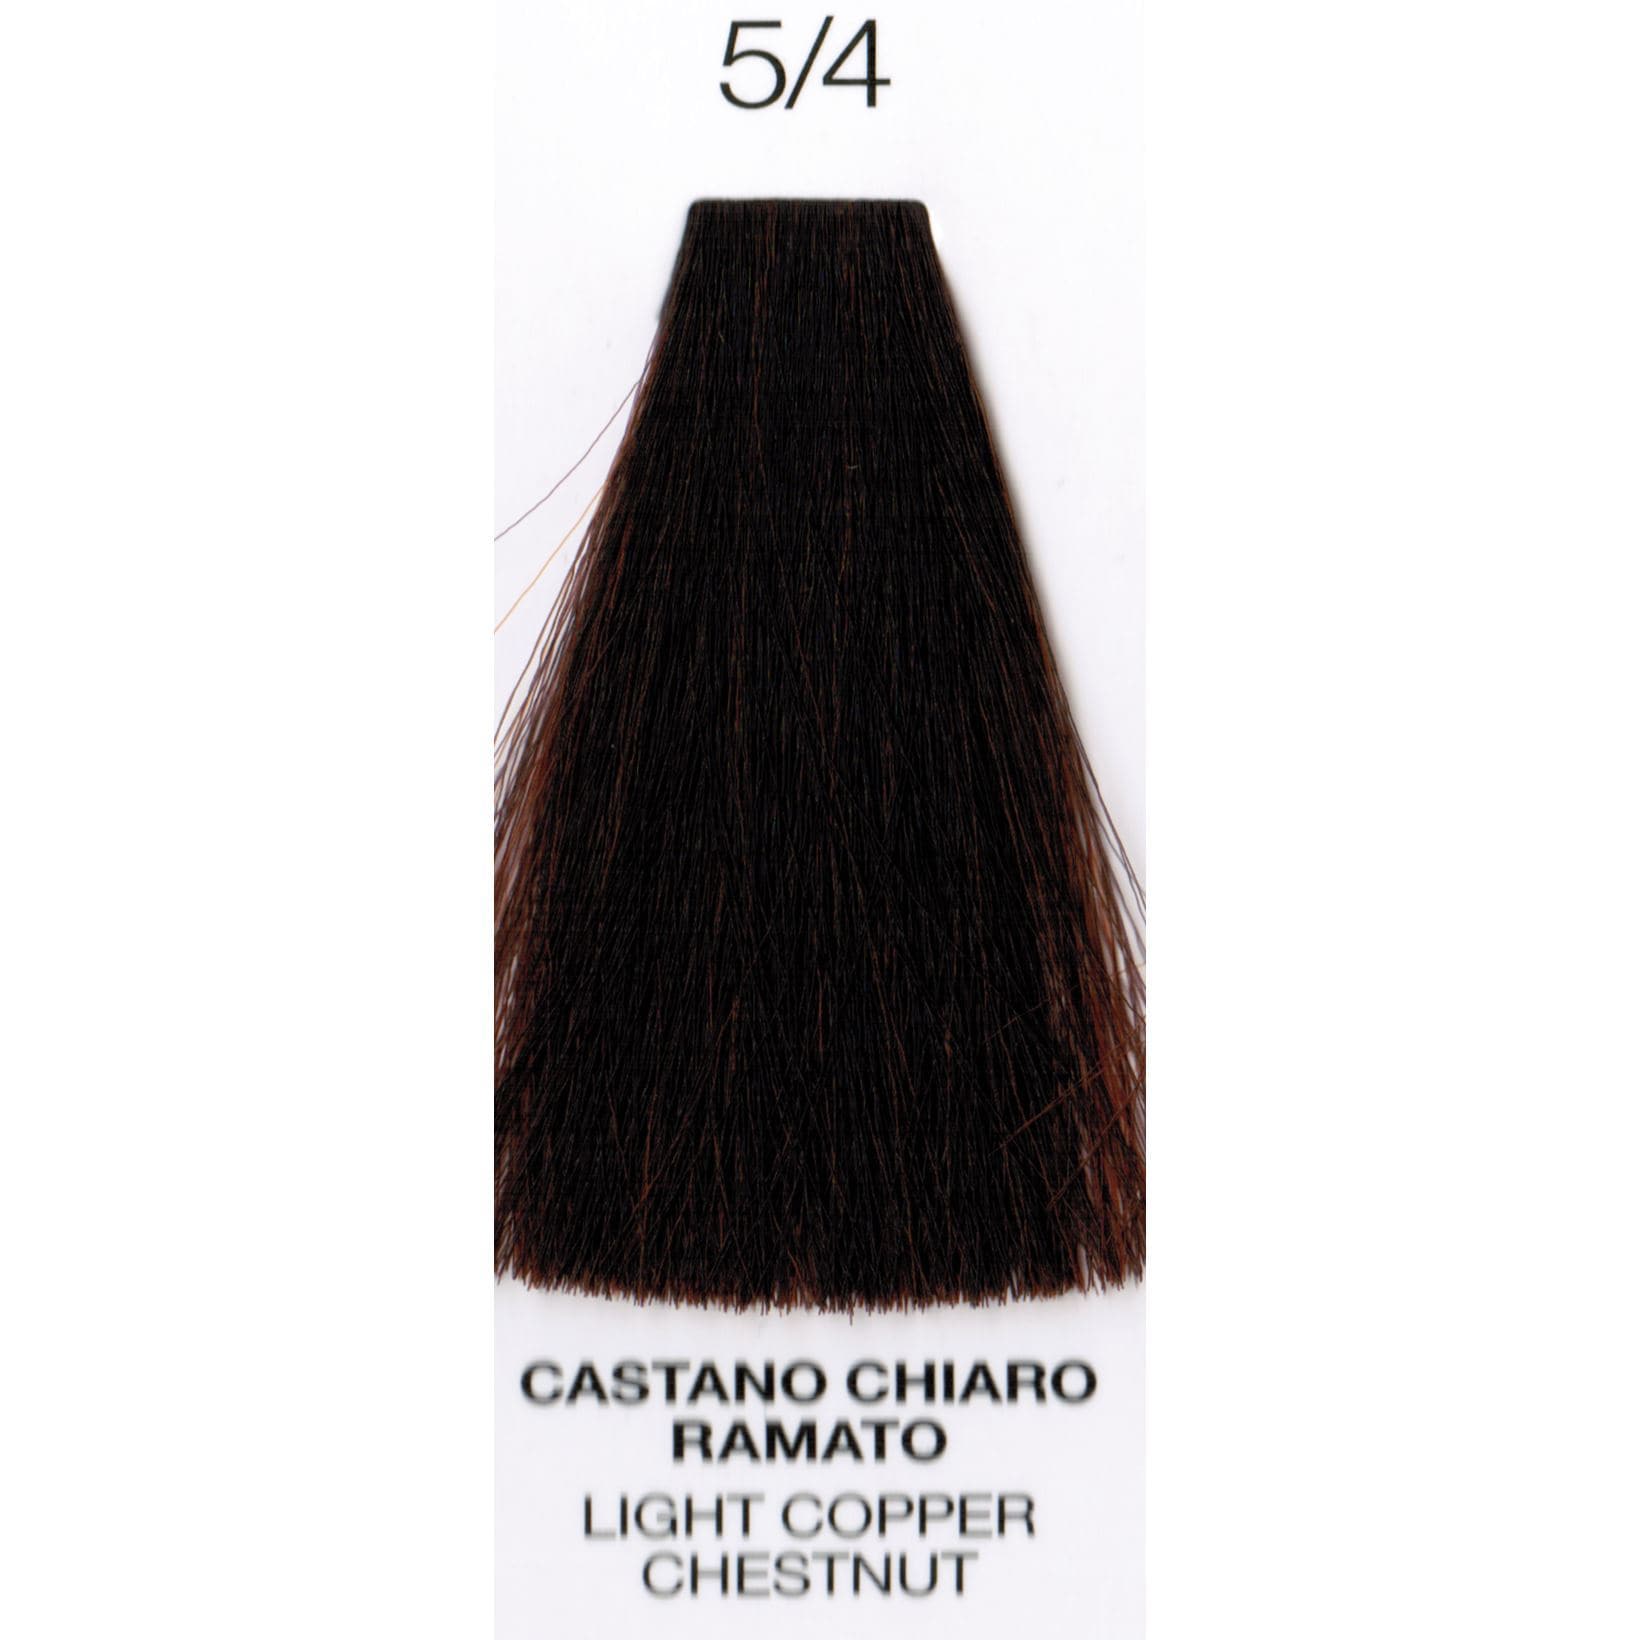 5/4 Light Copper Chestnut | Ammonia-Free Permanent Hair Color | Purity | OYSTER - SH Salons